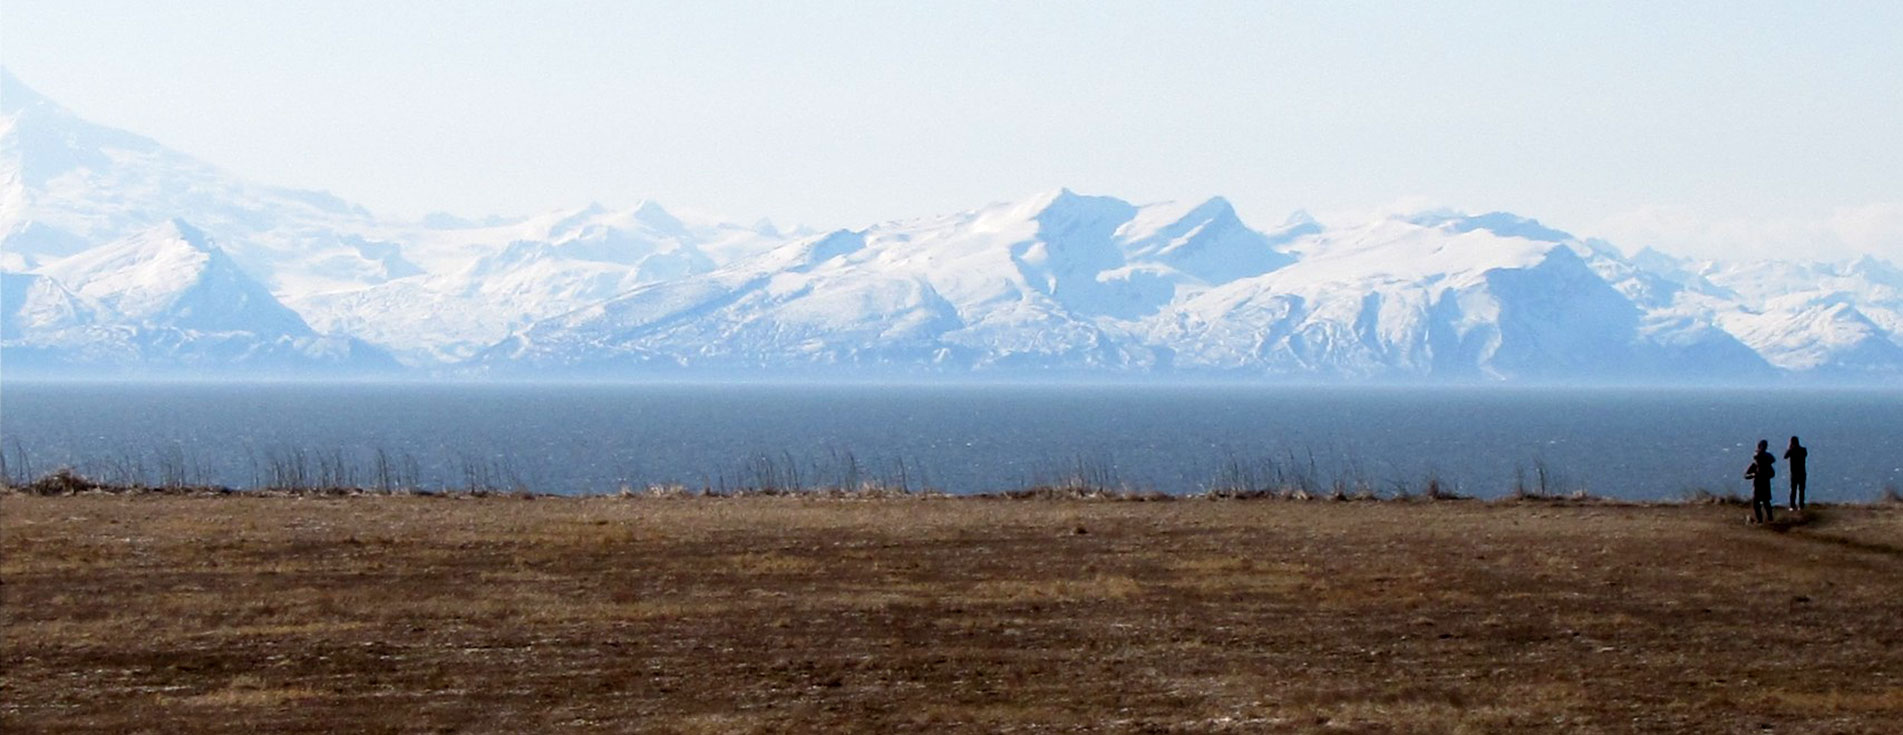 Mountains shrouded in fog are seen across Cook Inlet as two people walk the shoreline of Kenai.